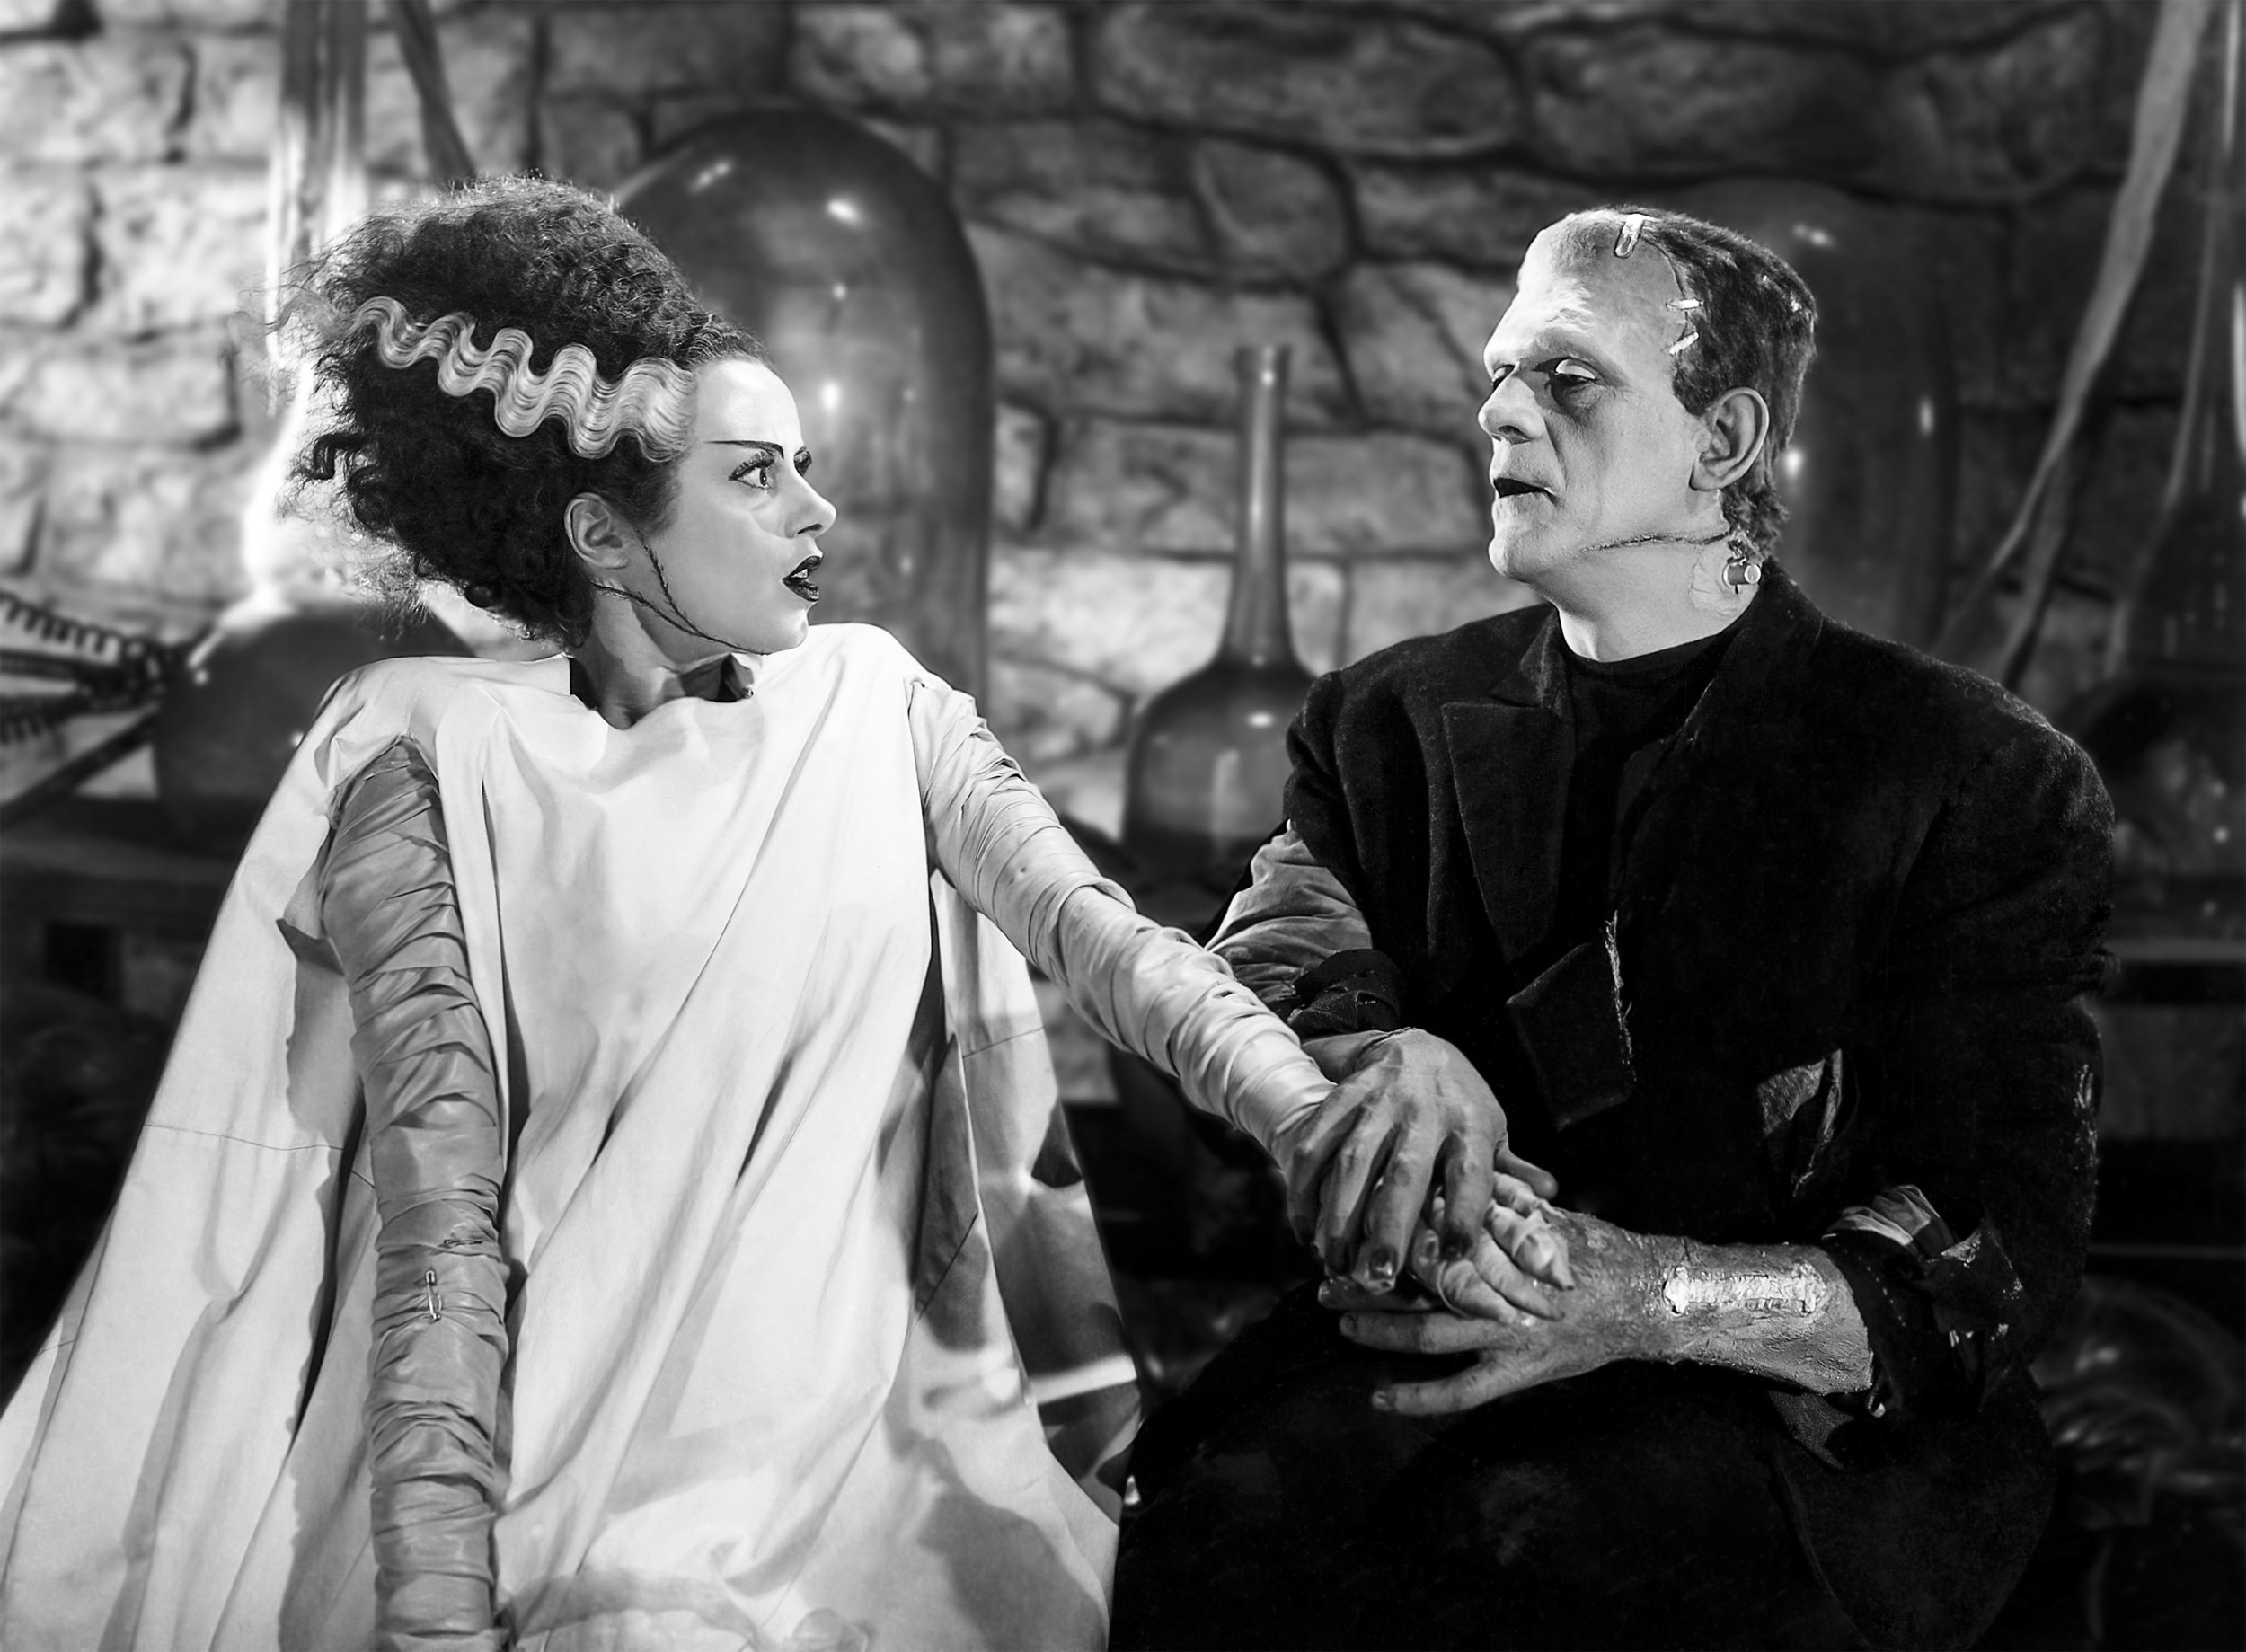 The Bride of Frankenstein: A Gothic Masterpiece - The American Society of  Cinematographers (en-US)